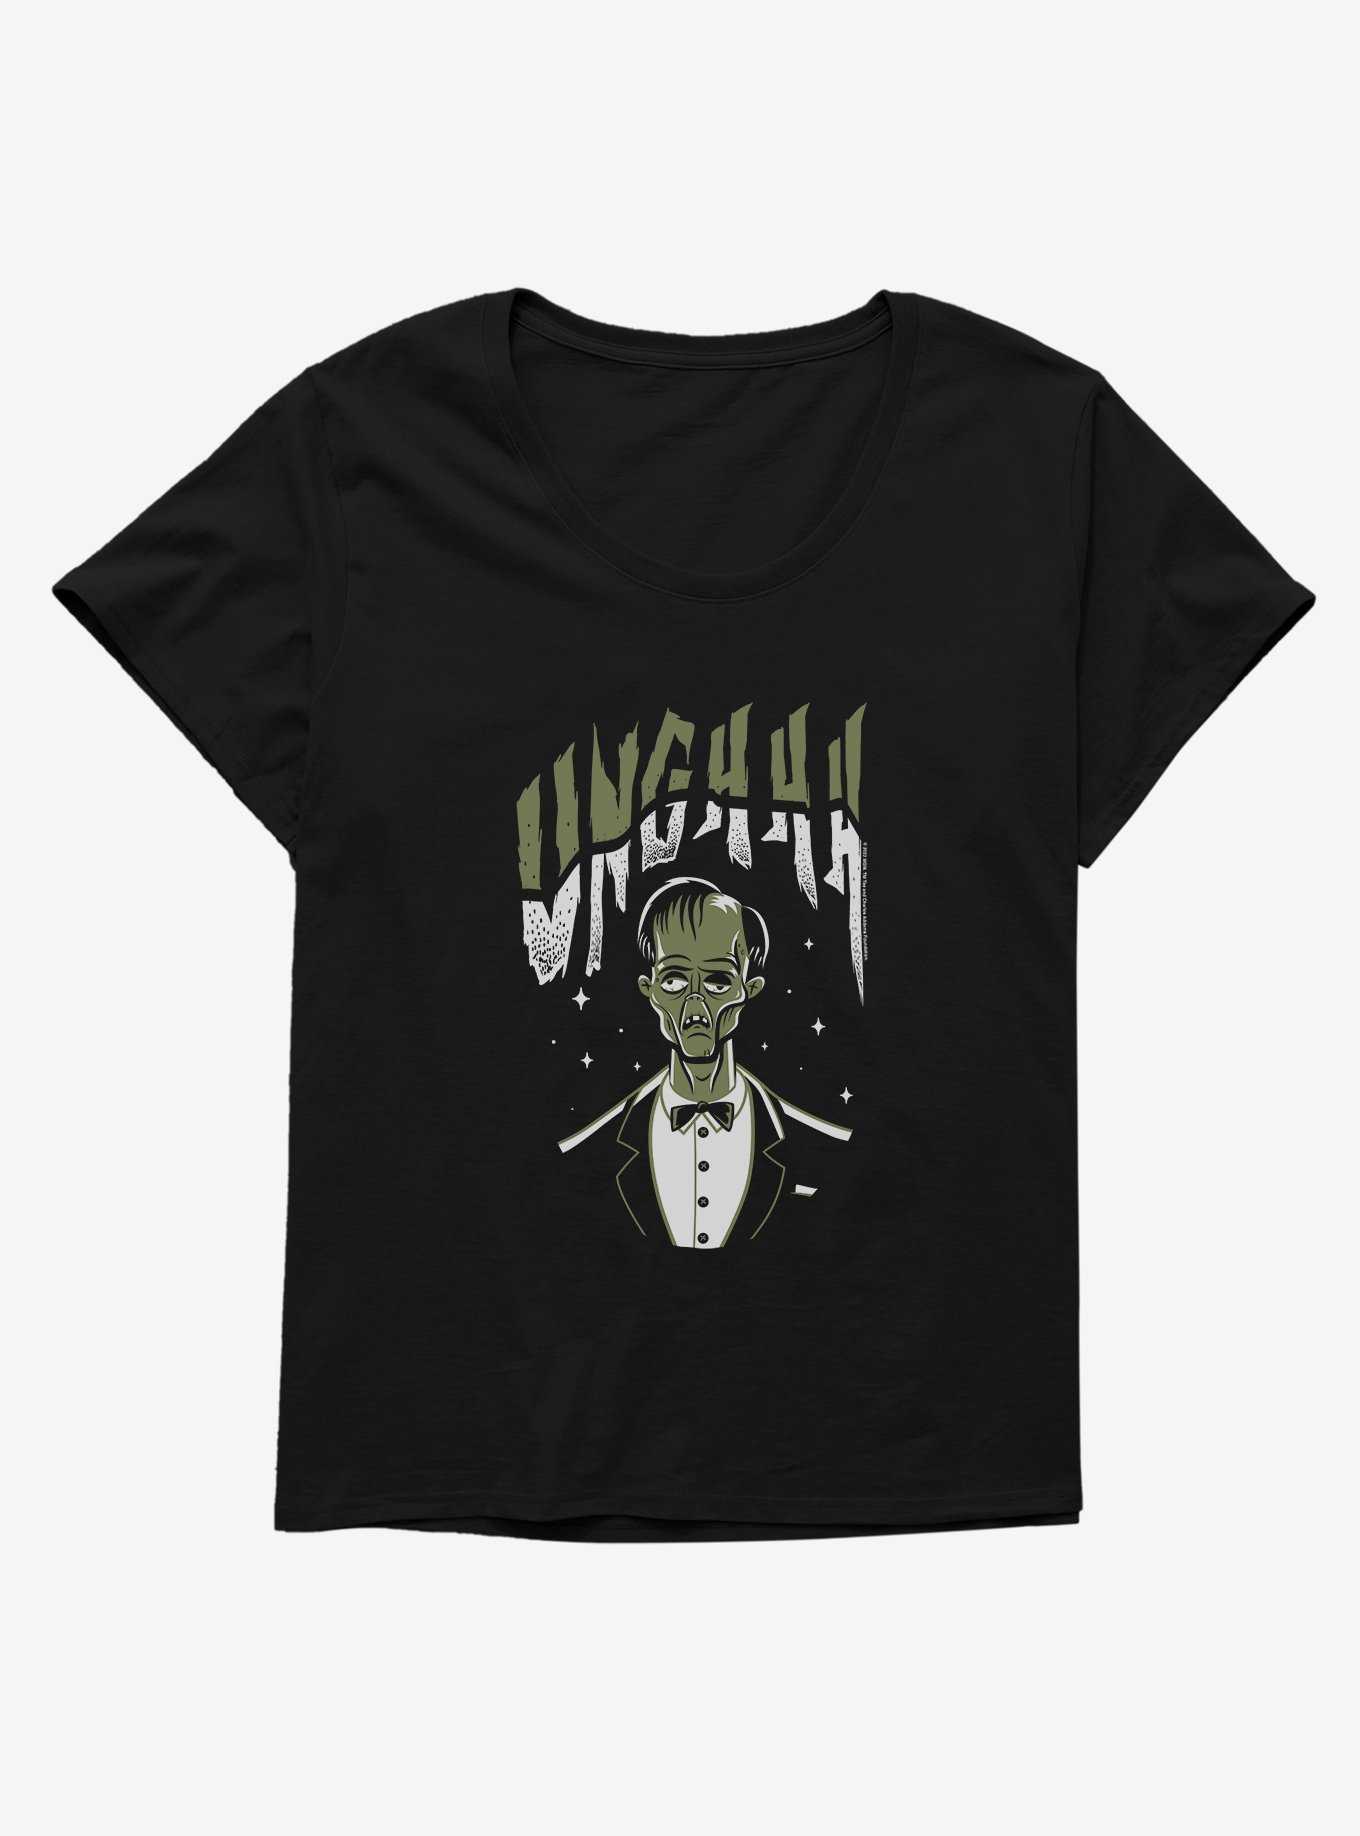 Addams Family Movie Caricature Lurch Unghhh Girls T-Shirt Plus Size, , hi-res